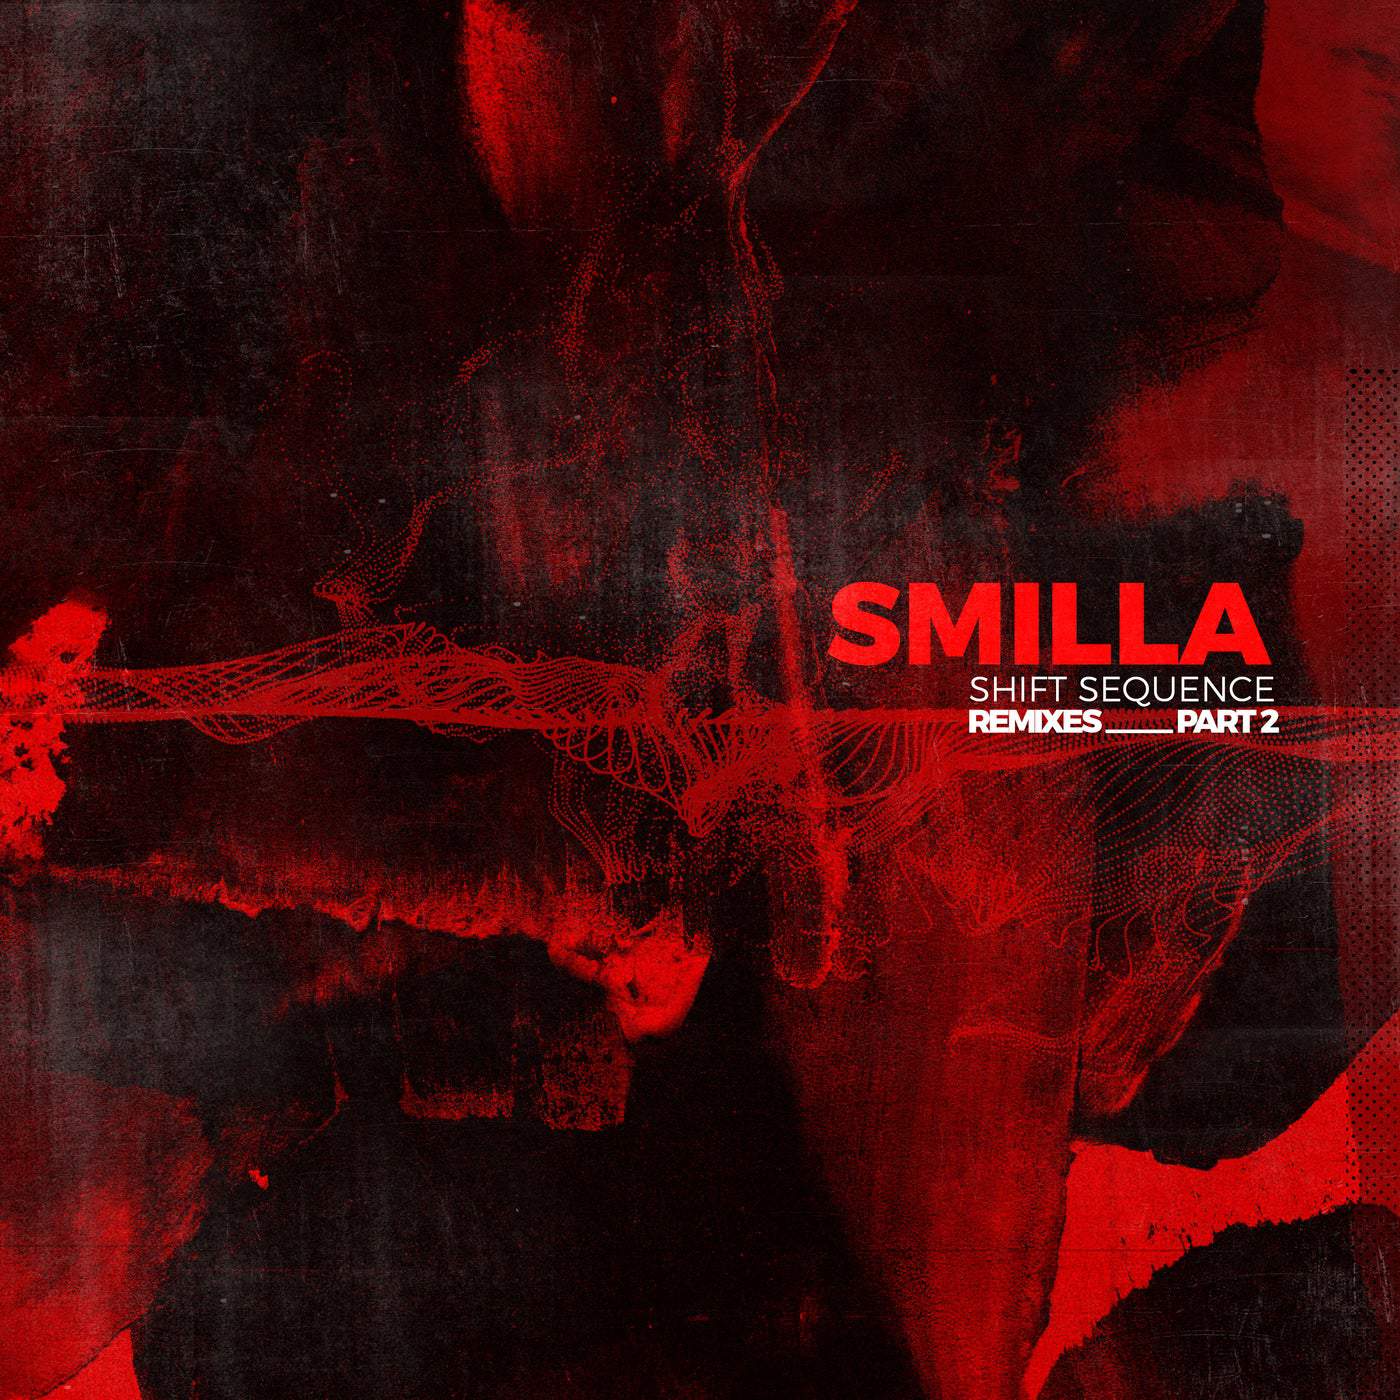 Download Smilla - Shift Sequence Remixes Part 2 on Electrobuzz